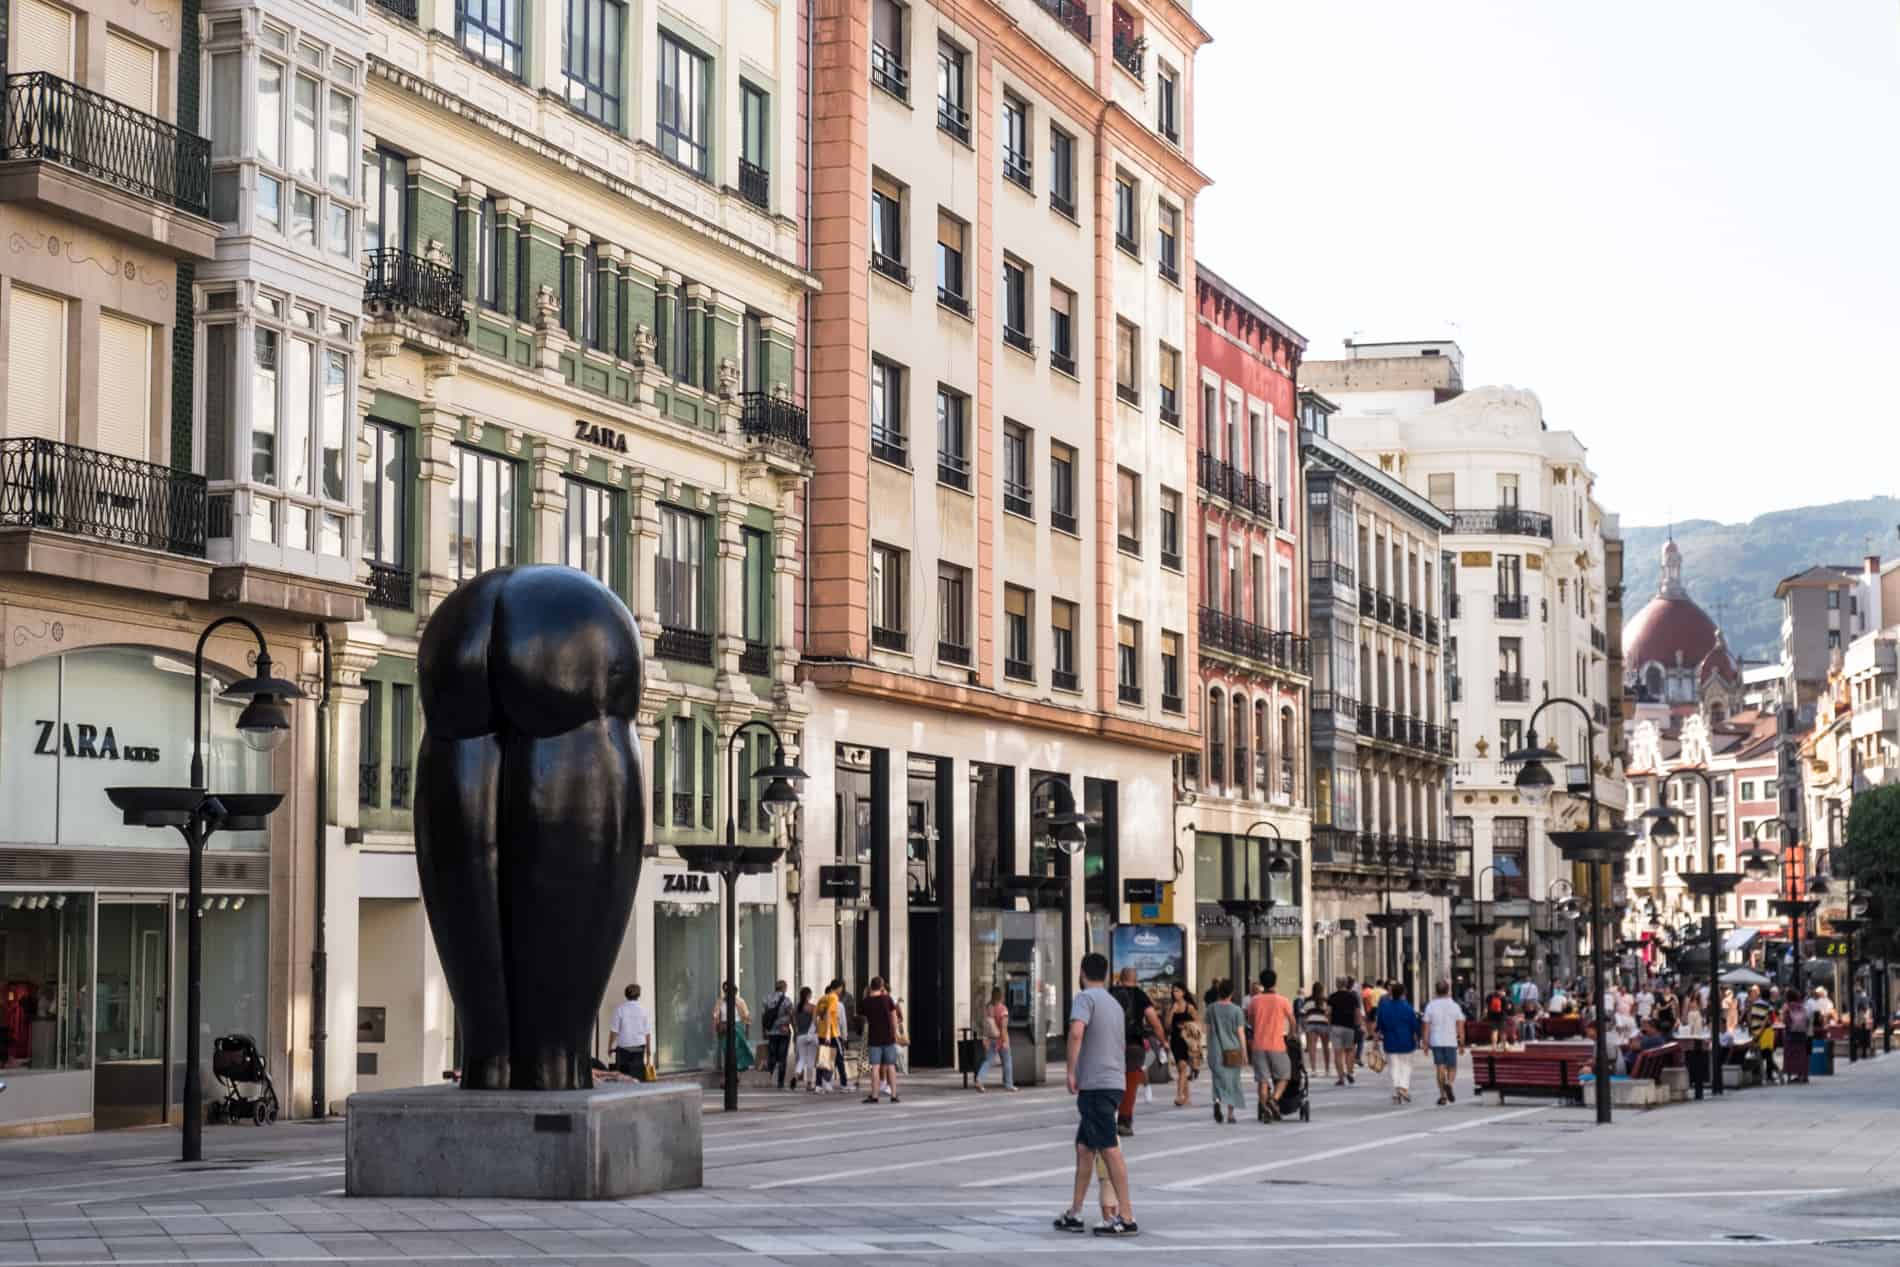 The 'Culis Monumentalibus' sculpture in Oviedo is a 4-metre high, pair of buttocks that stands in the middle of a shopping street, 